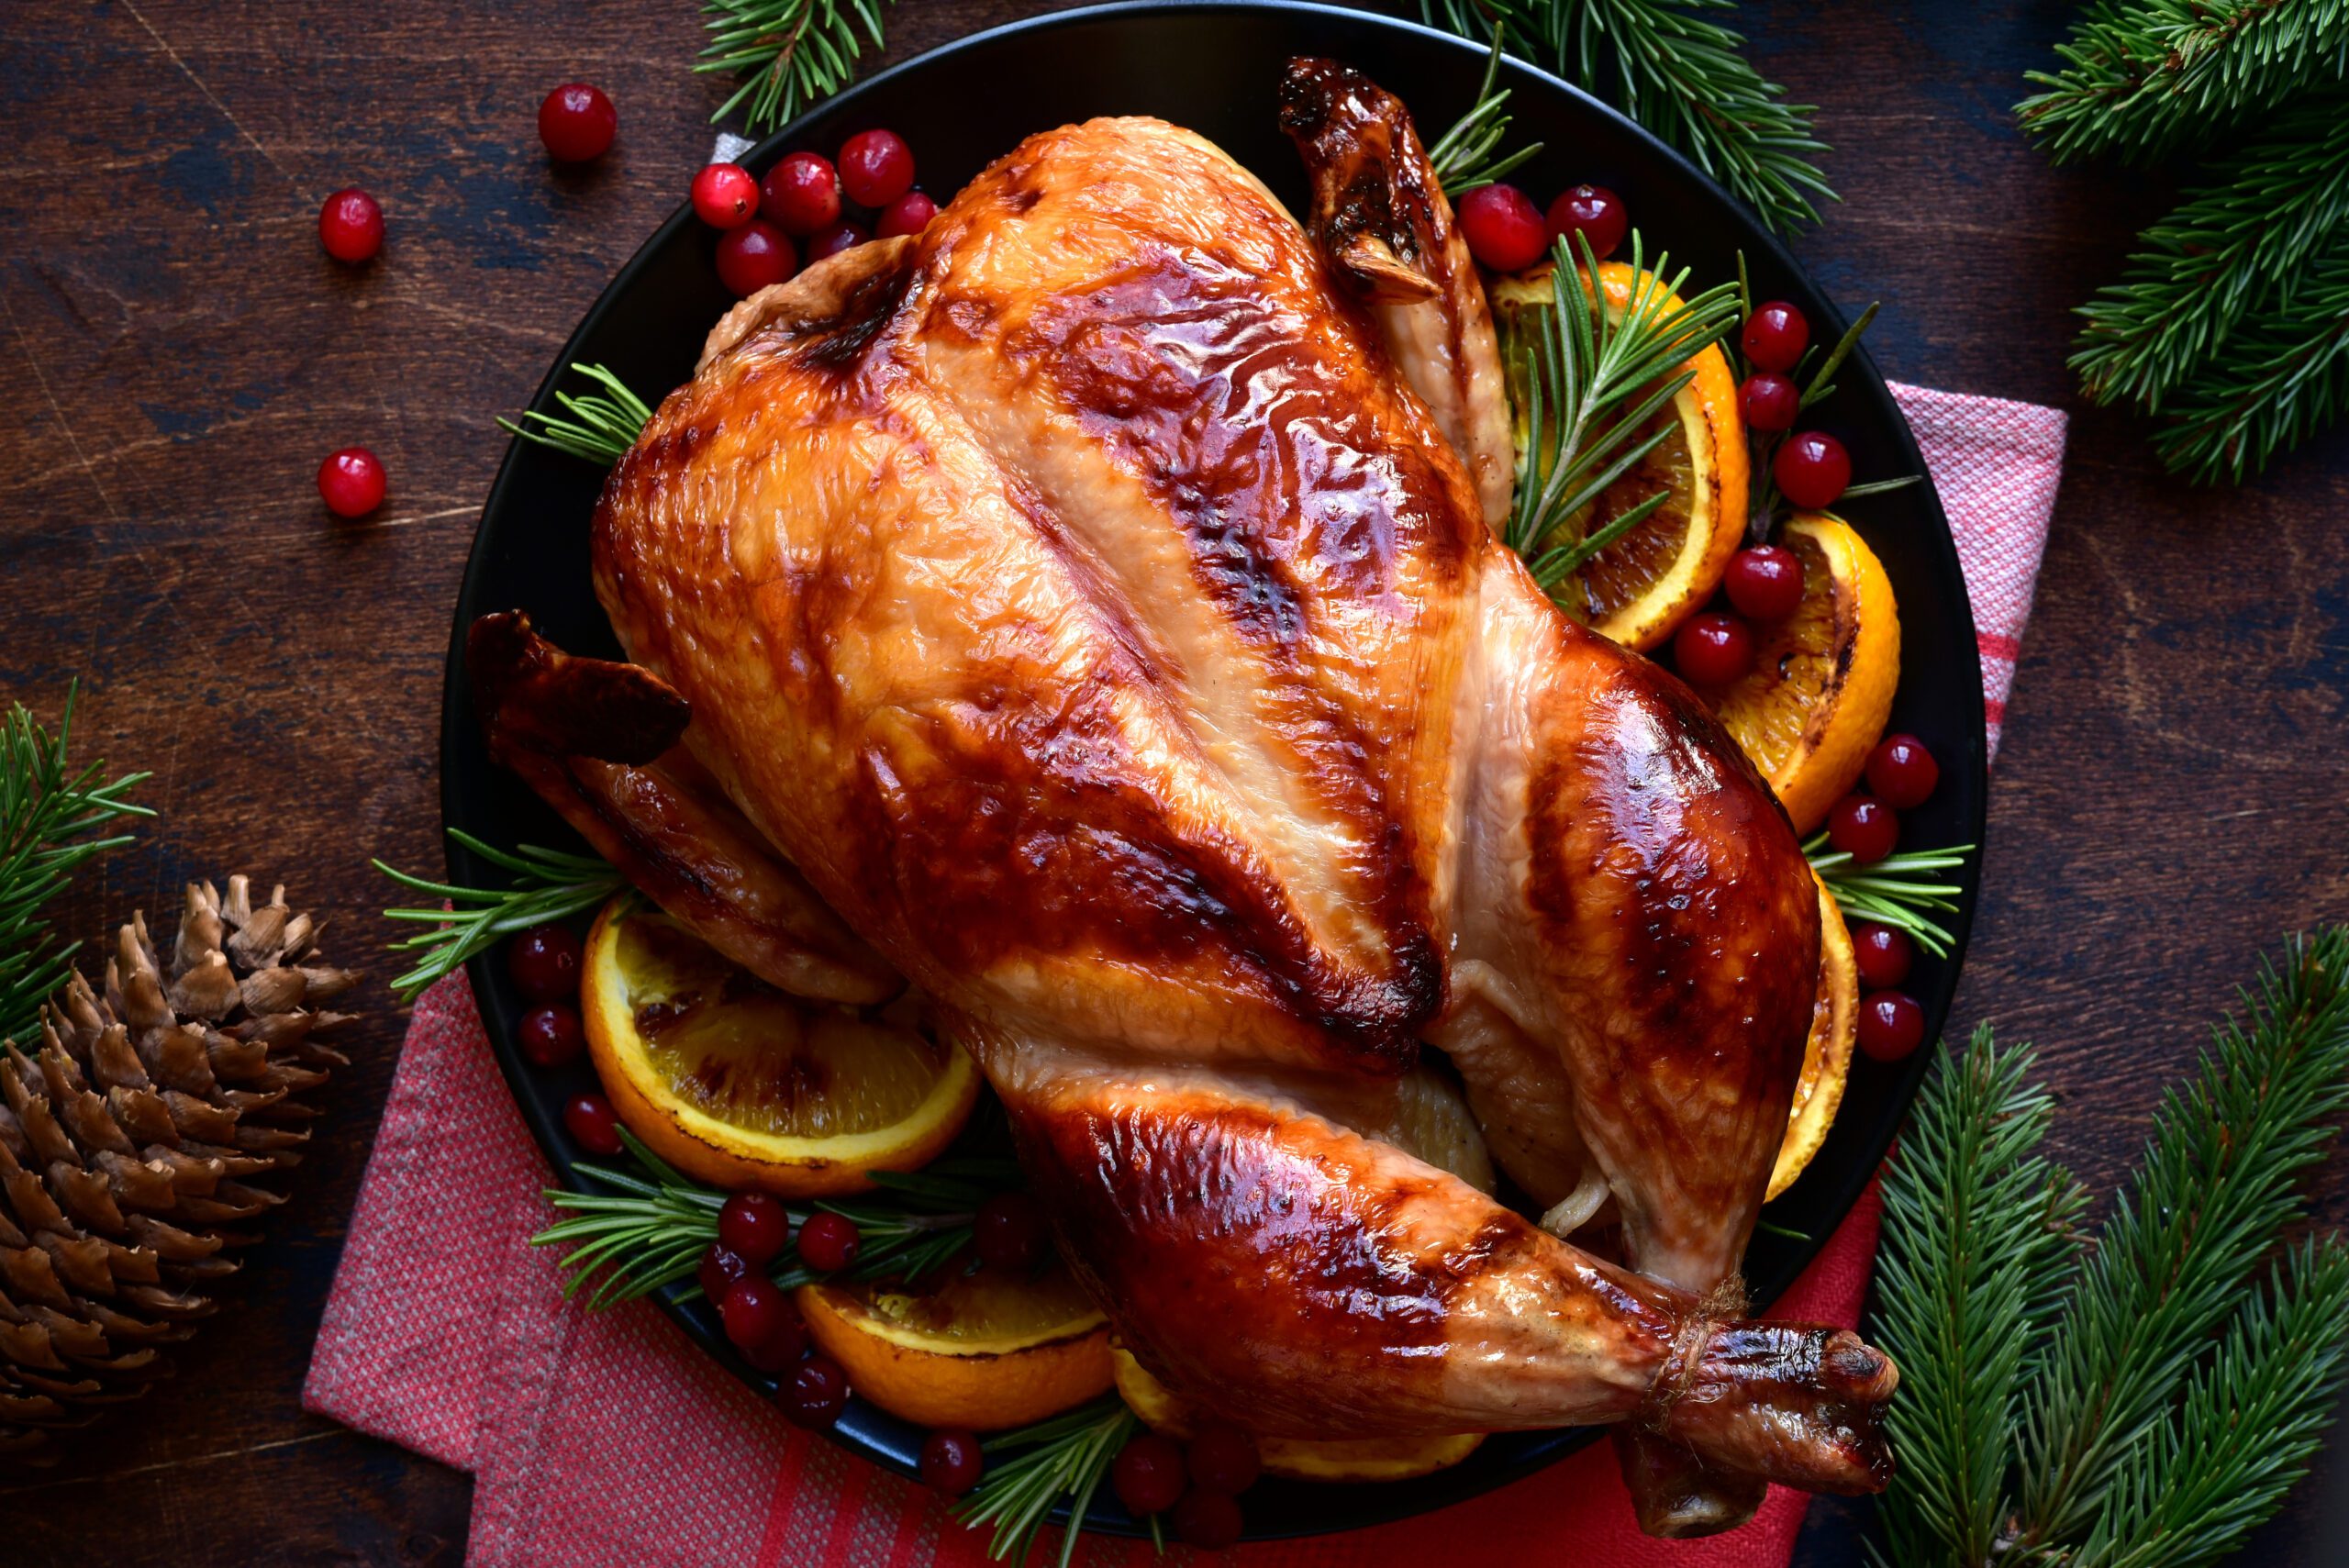 Roasted,Chicken,With,Oranges,,rosemary,And,Cranberries,On,A,Christmas